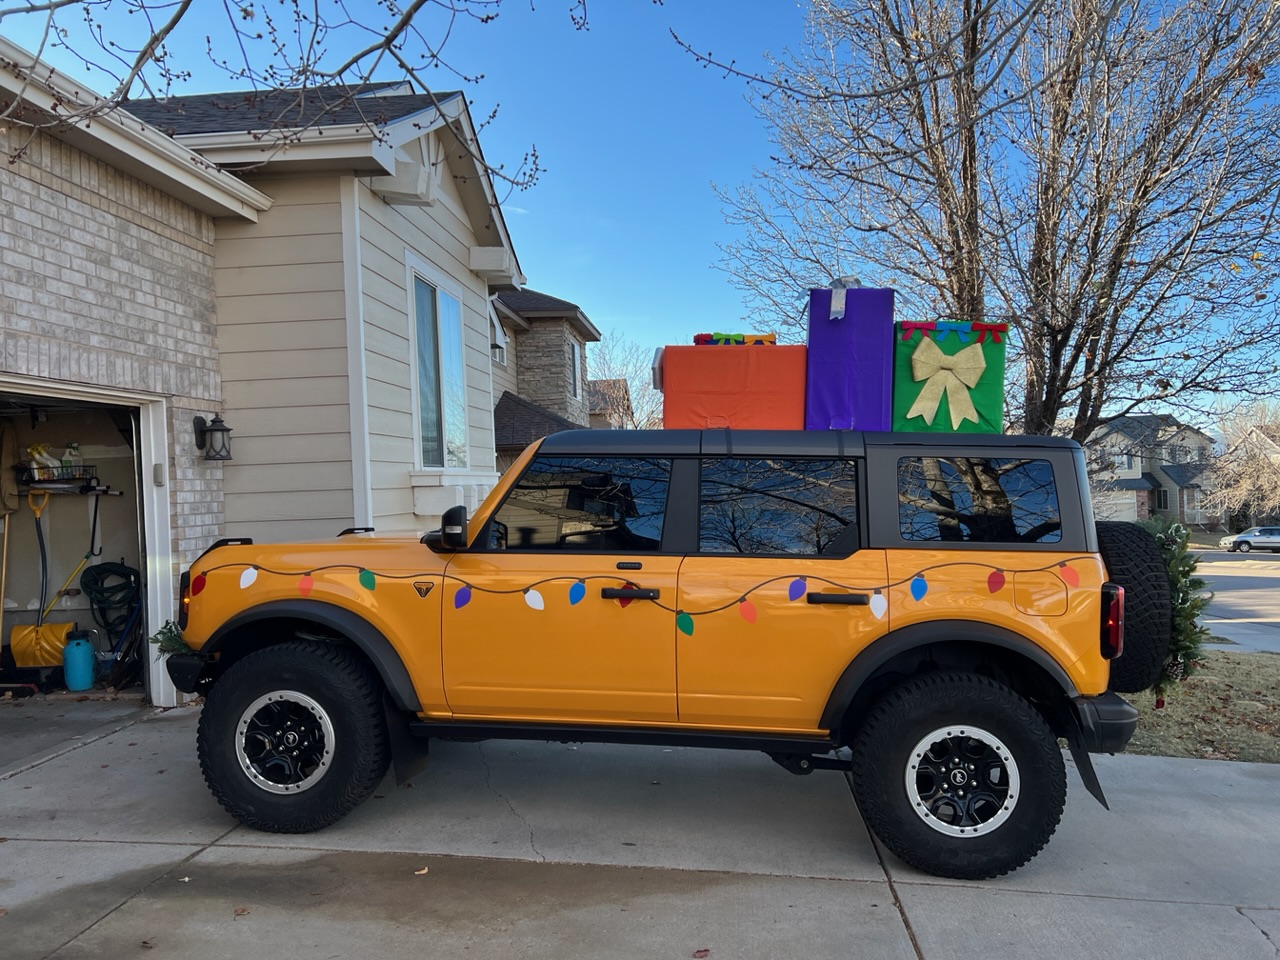 Ford Bronco How are you decorating your Bronco for Christmas or holidays? Post yours! 🎅 8E3F8585-F704-4777-86D7-DBBC40C65BEB